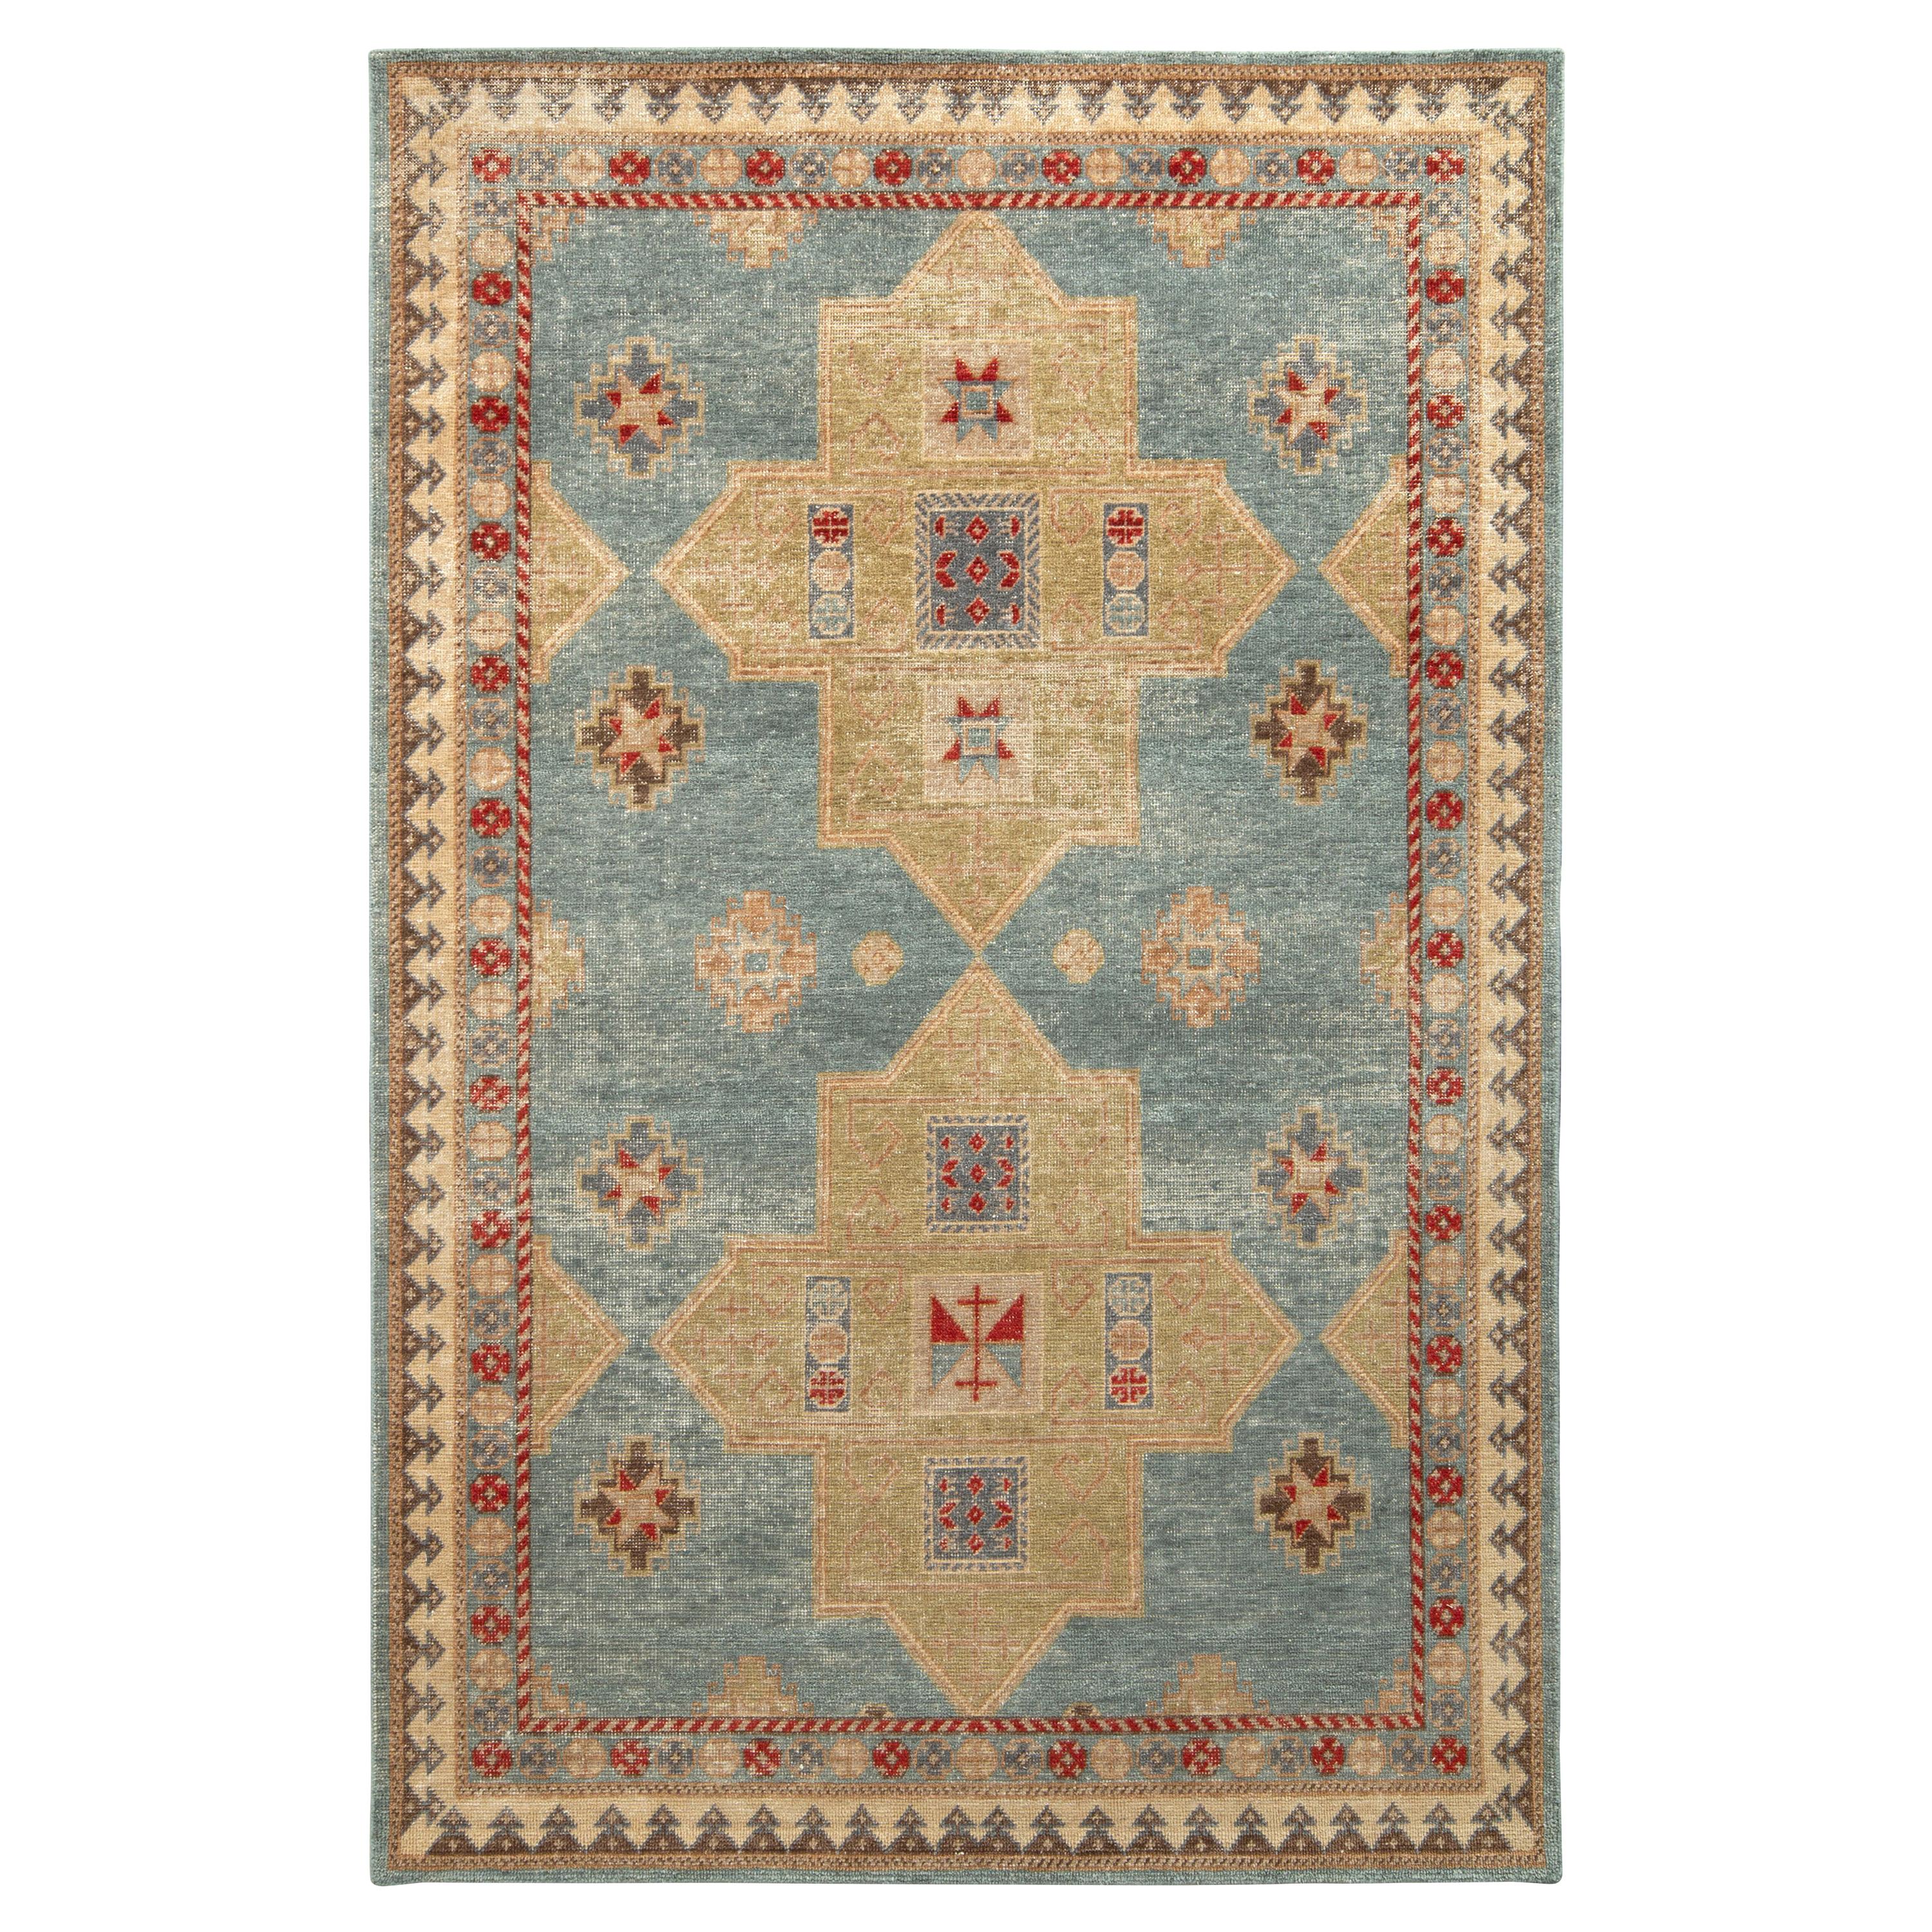 Rug & Kilim’s Distressed Classic Style Rug in Blue, Beige-Green Geometric Patter For Sale